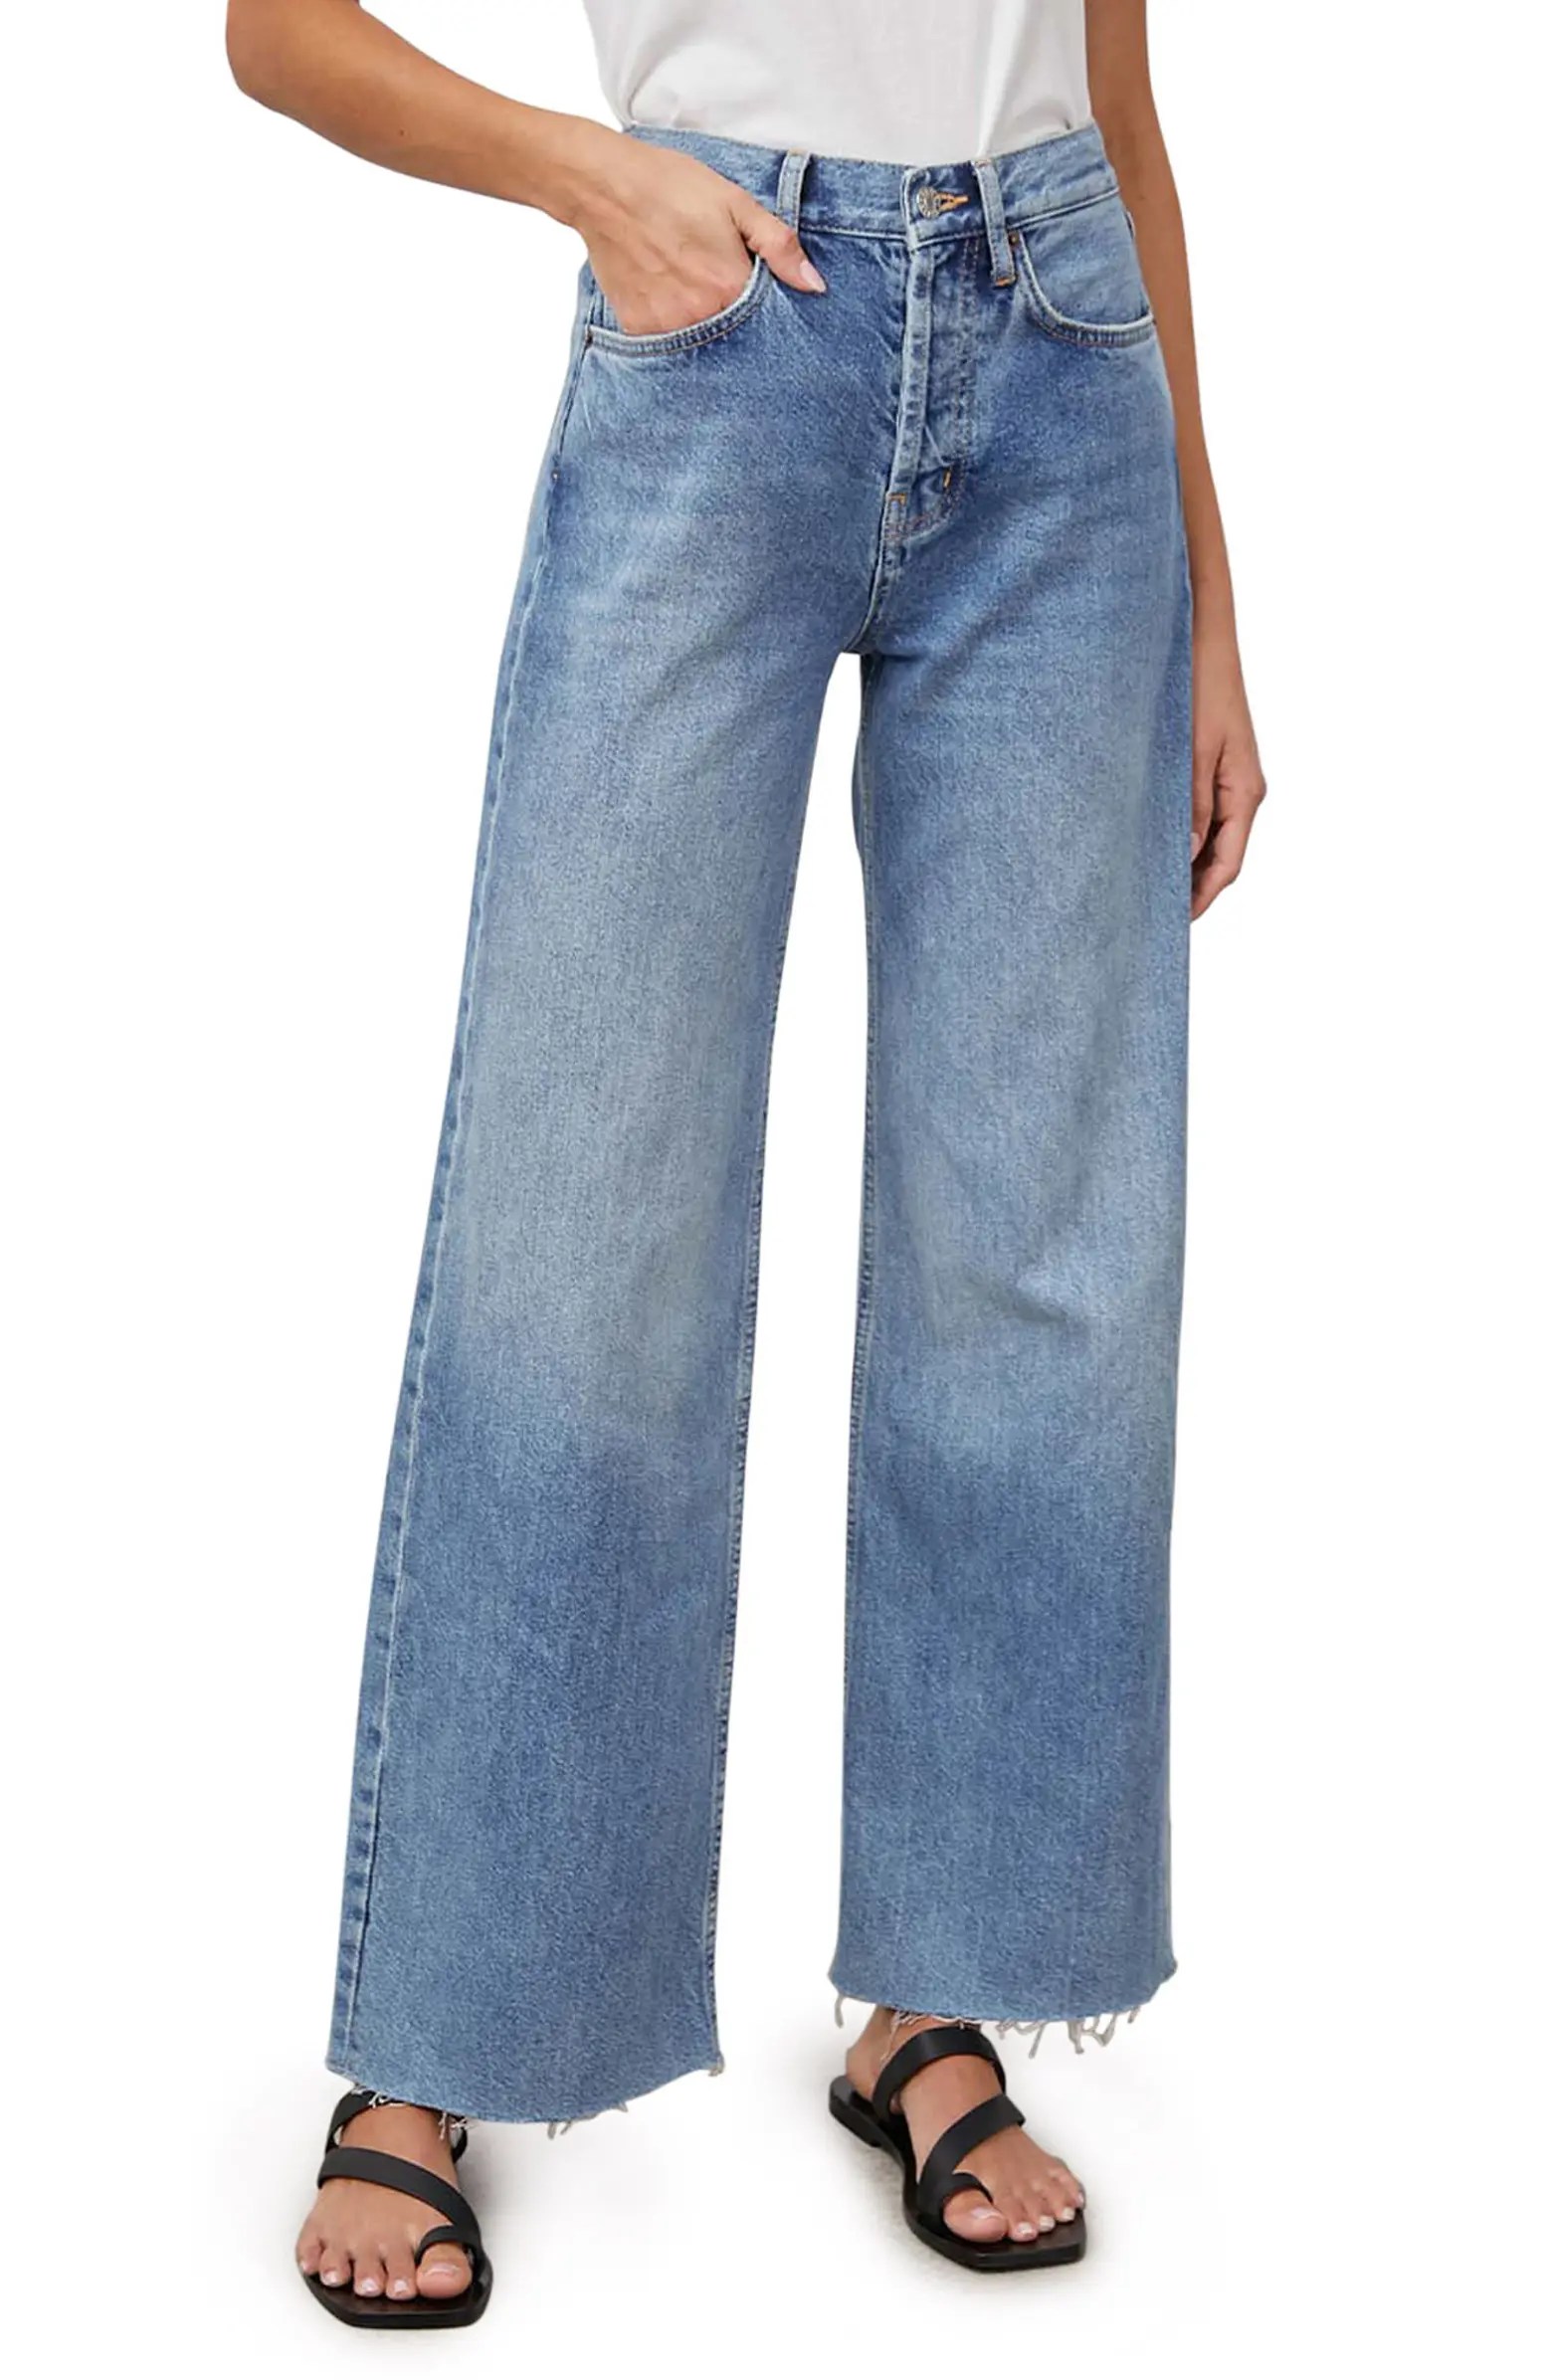 19 Best Pairs of Wide Leg Jeans of All Styles in 2023 | Well+Good